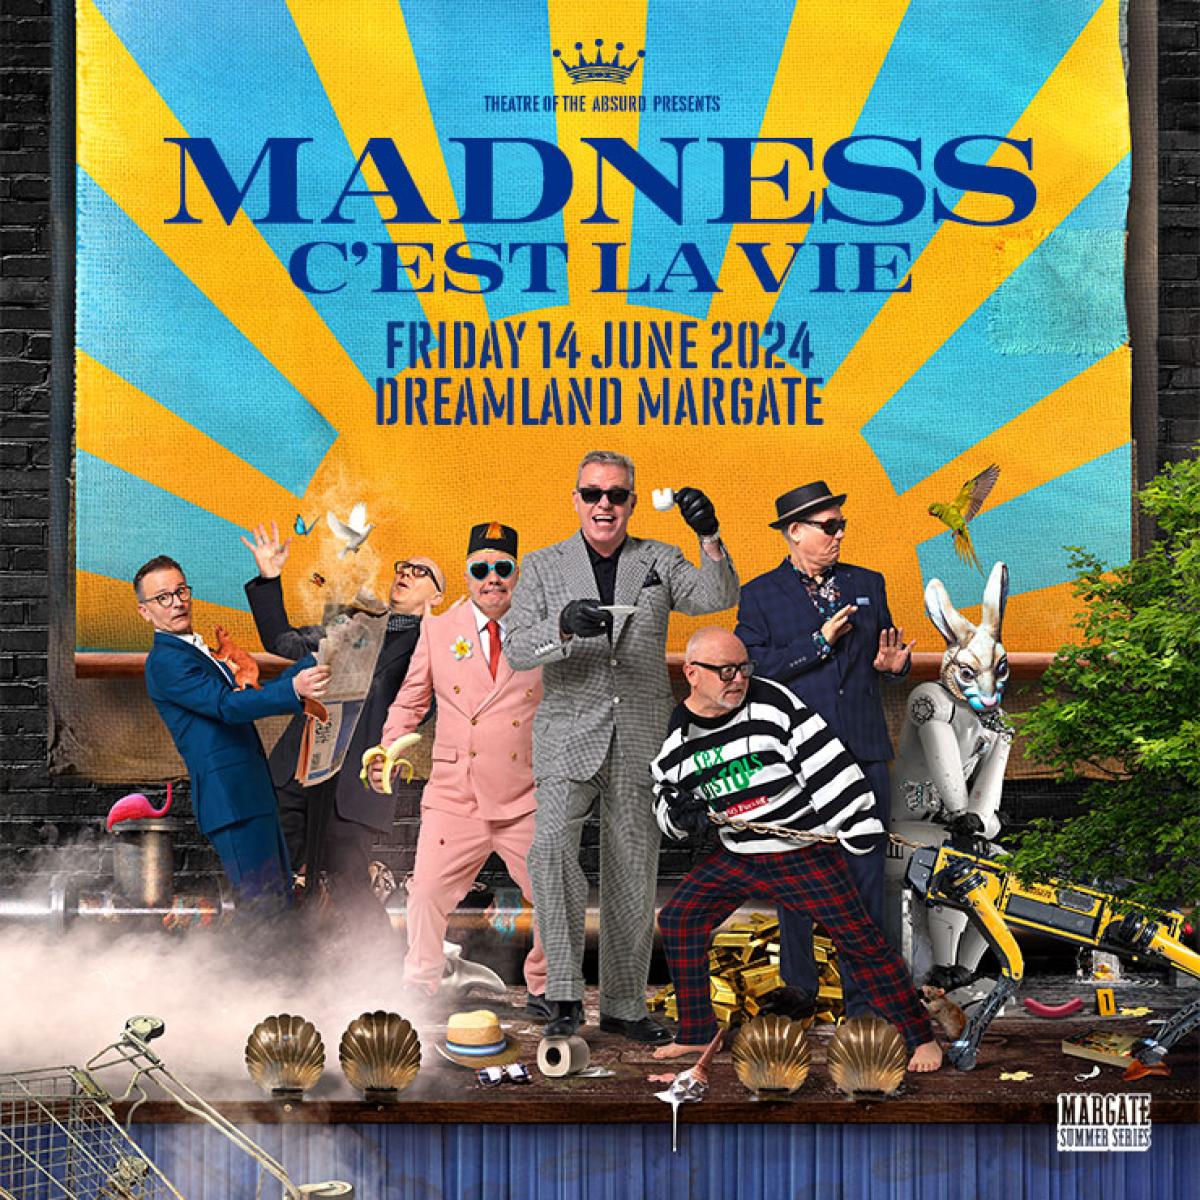 Madness at Dreamland Margate Tickets